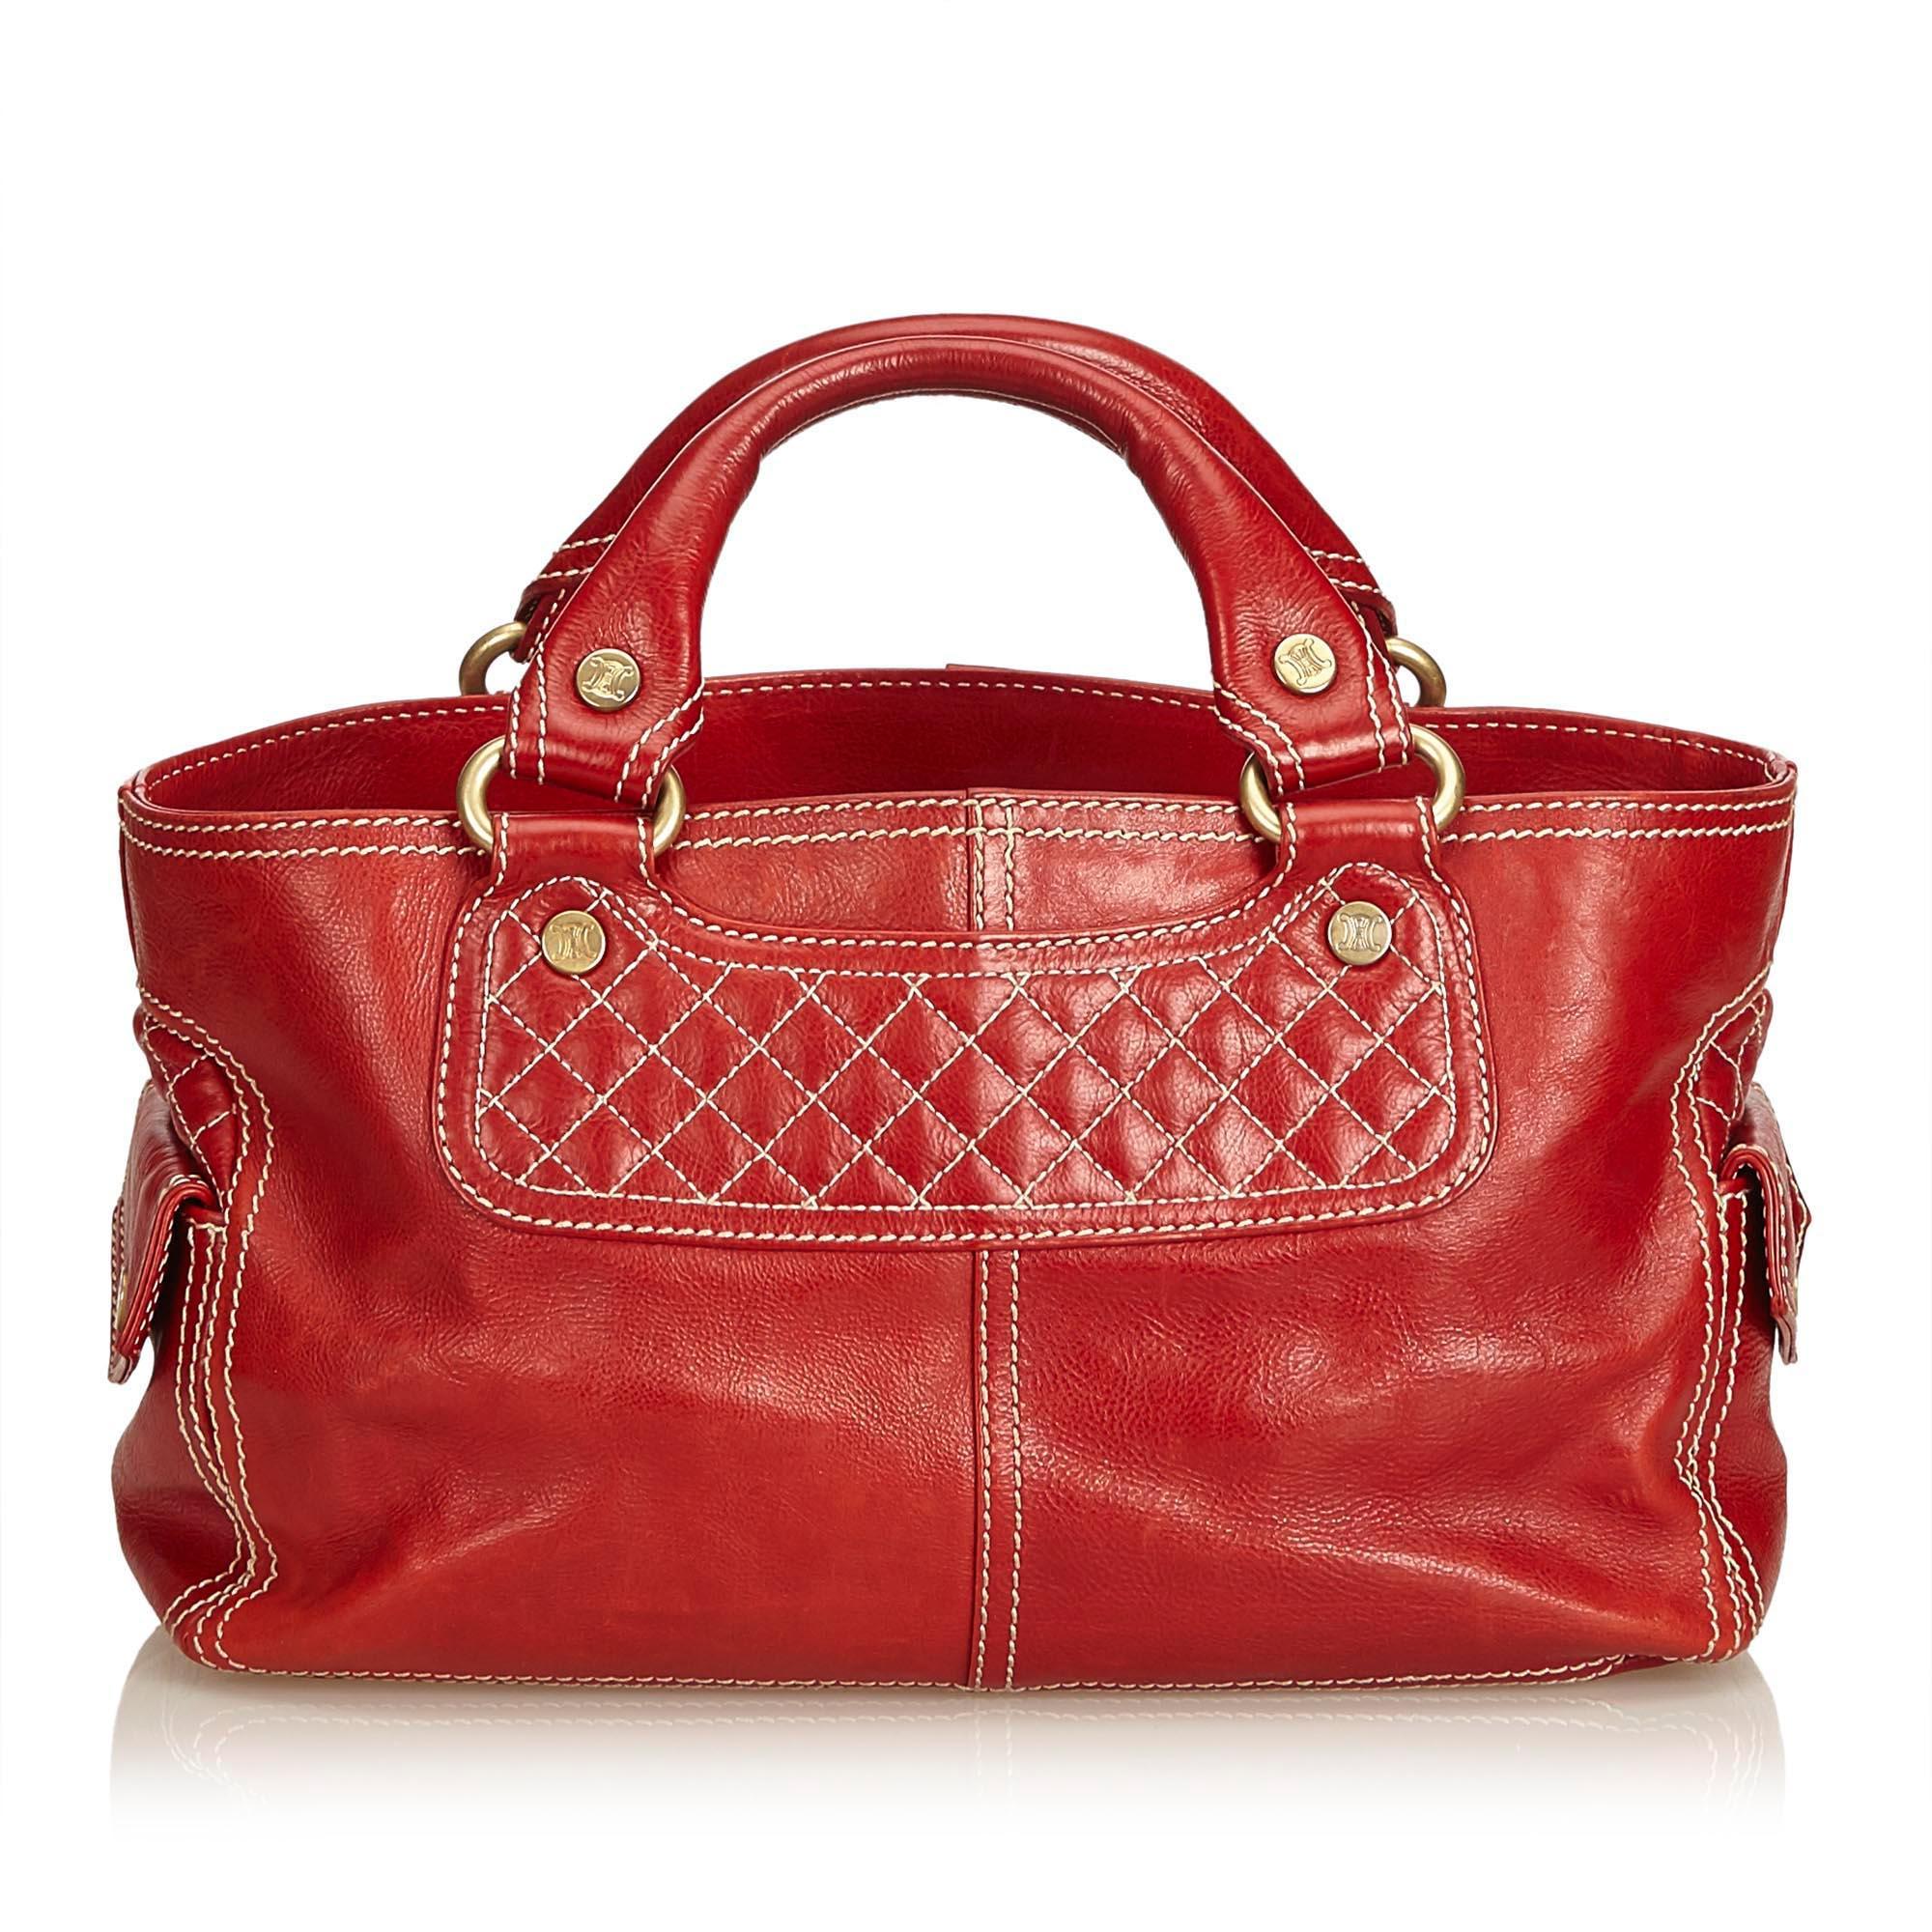 Celine Red Leather Boogie Bag In Good Condition For Sale In Orlando, FL